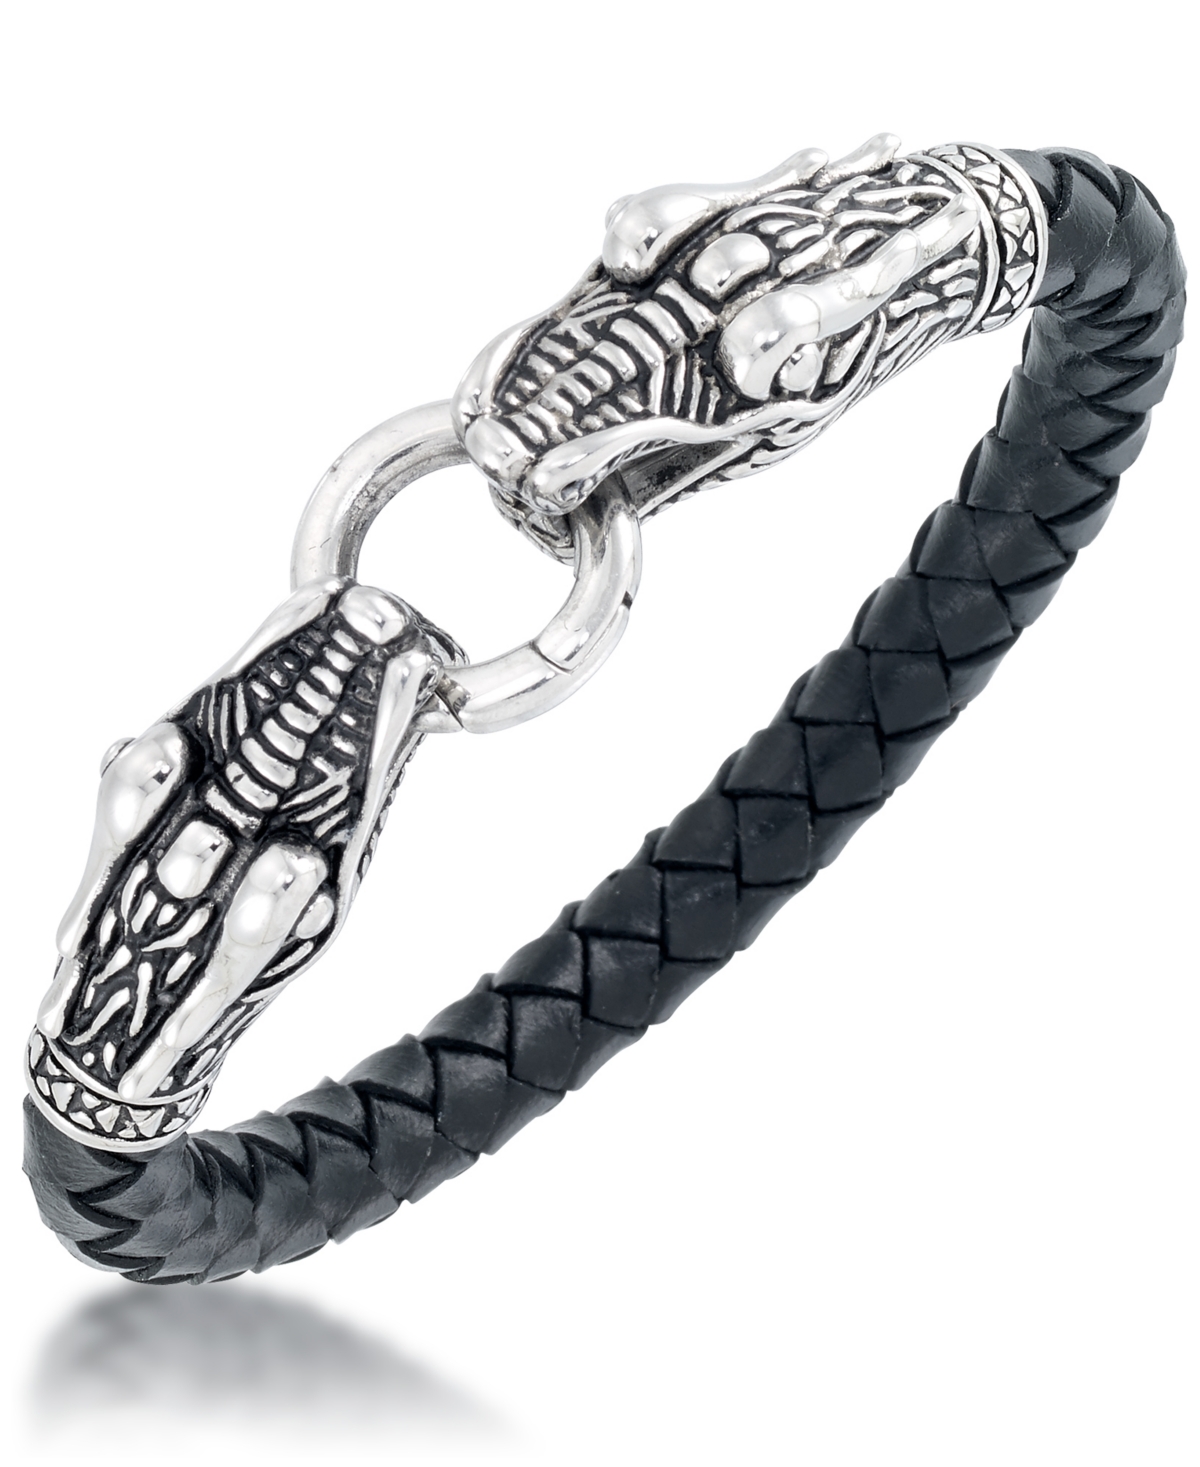 Andrew Charles by Andy Hilfiger Men's Dragon Head Leather Bracelet in Stainless Steel